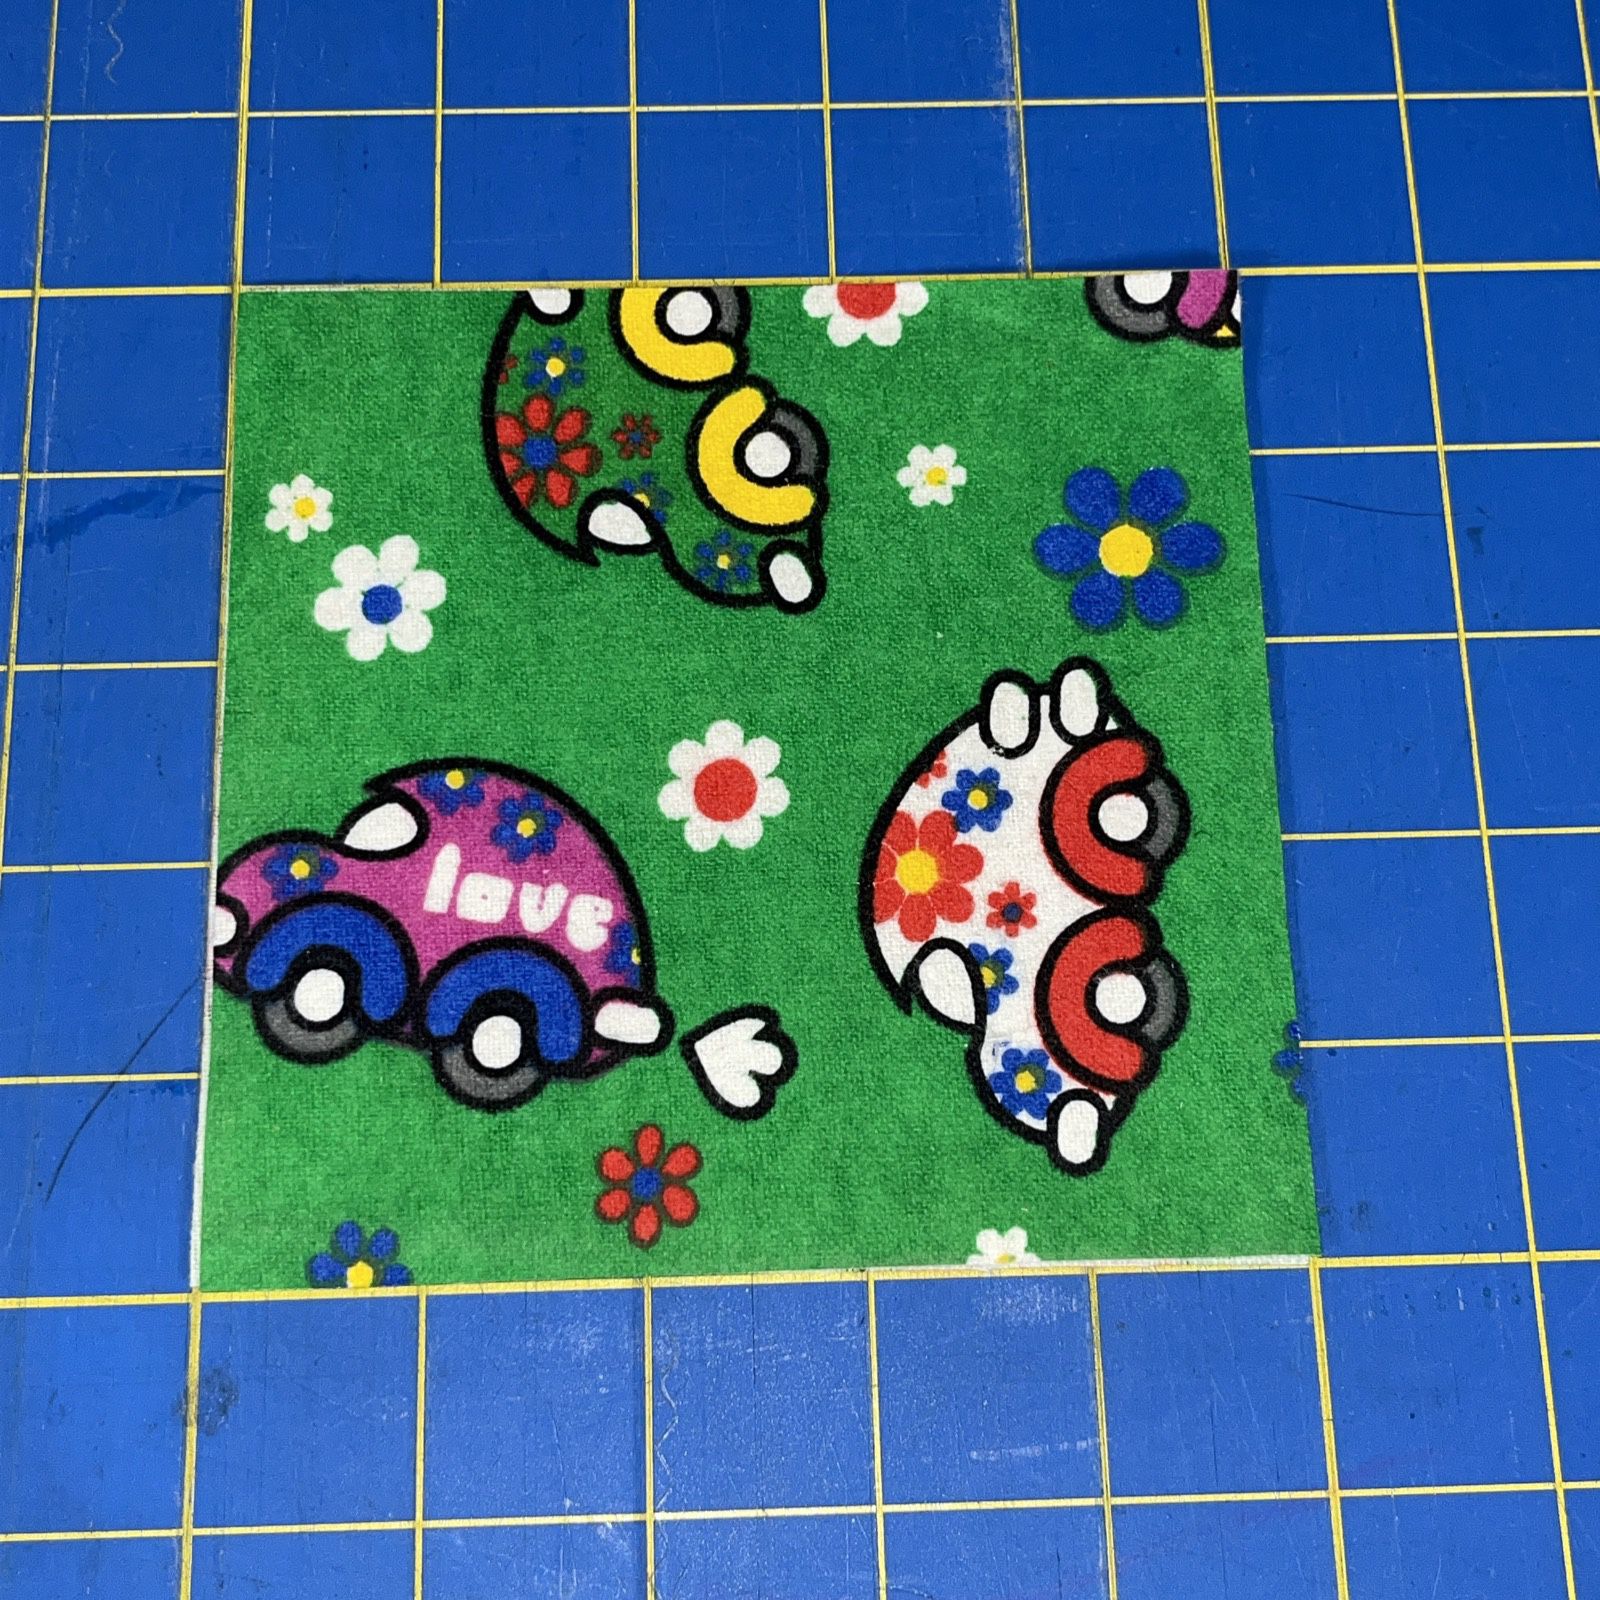 Flannel Fabric 5” Rotary Cut Squares -56 Squares, VW Bug, Love Bug  This Jo-Ann brand flannel fabric is perfect for crafting, quilting, and sewing pro